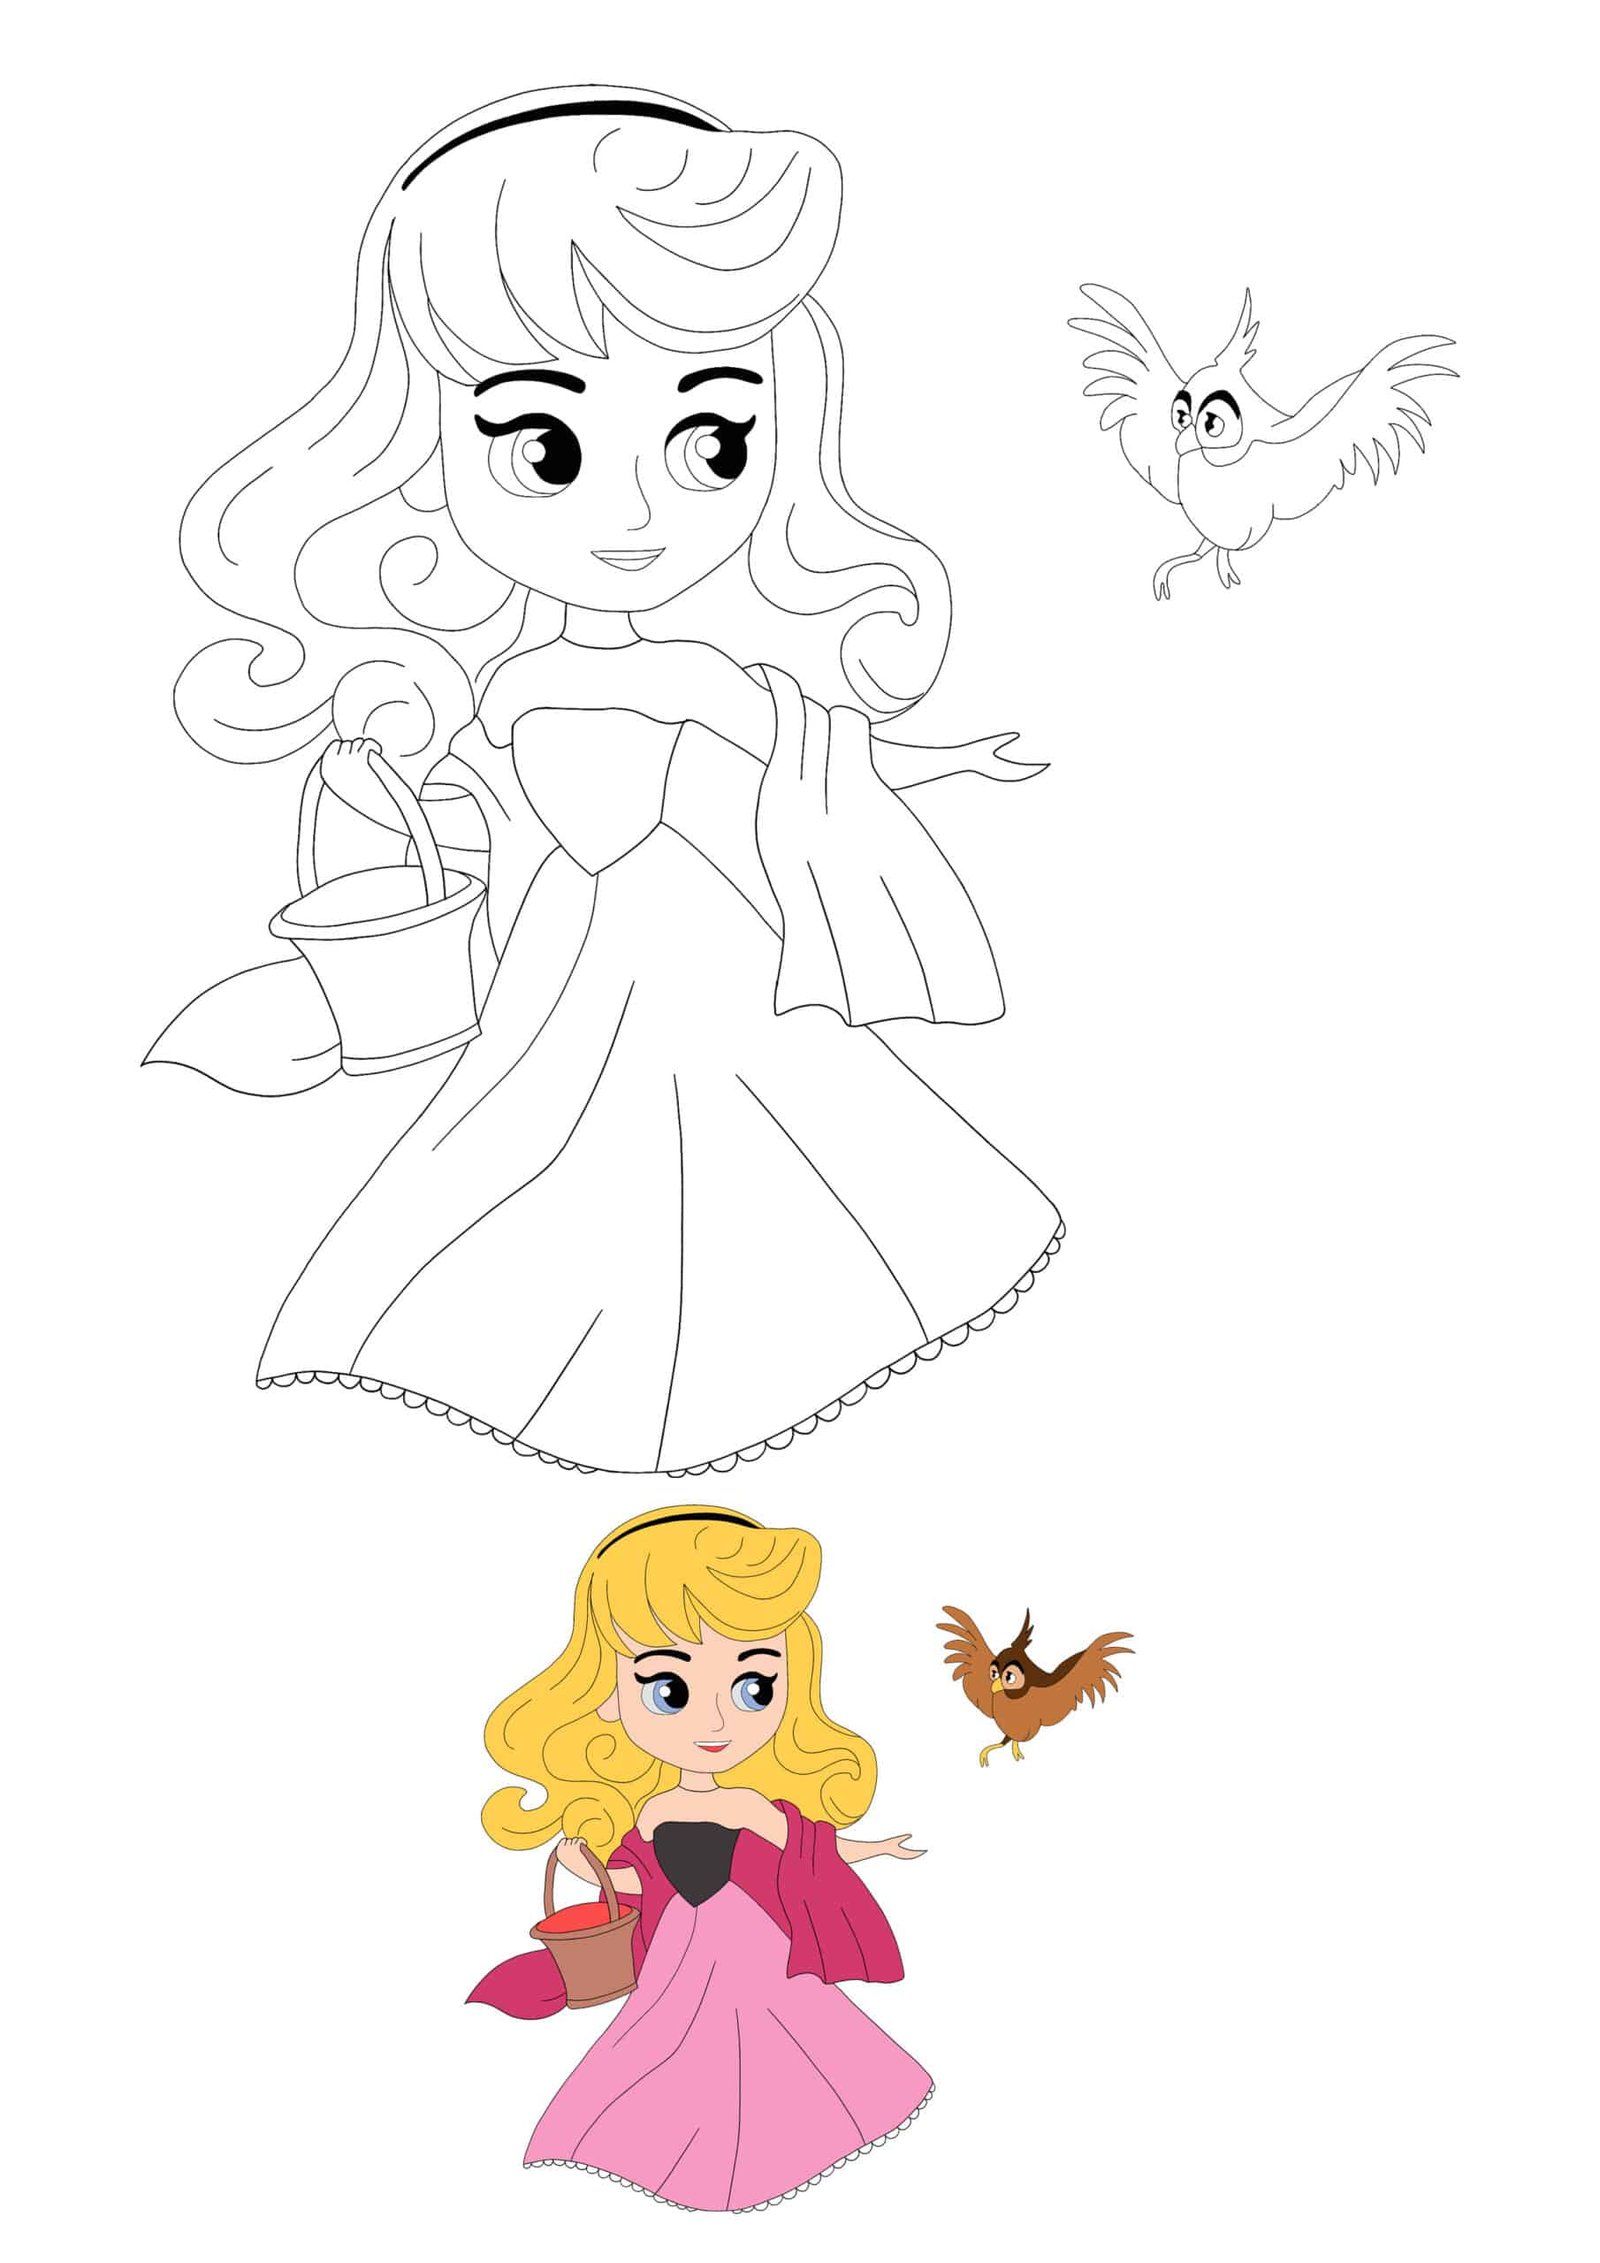 Cute Disney Princess Aurora With Bird coloring page for girls